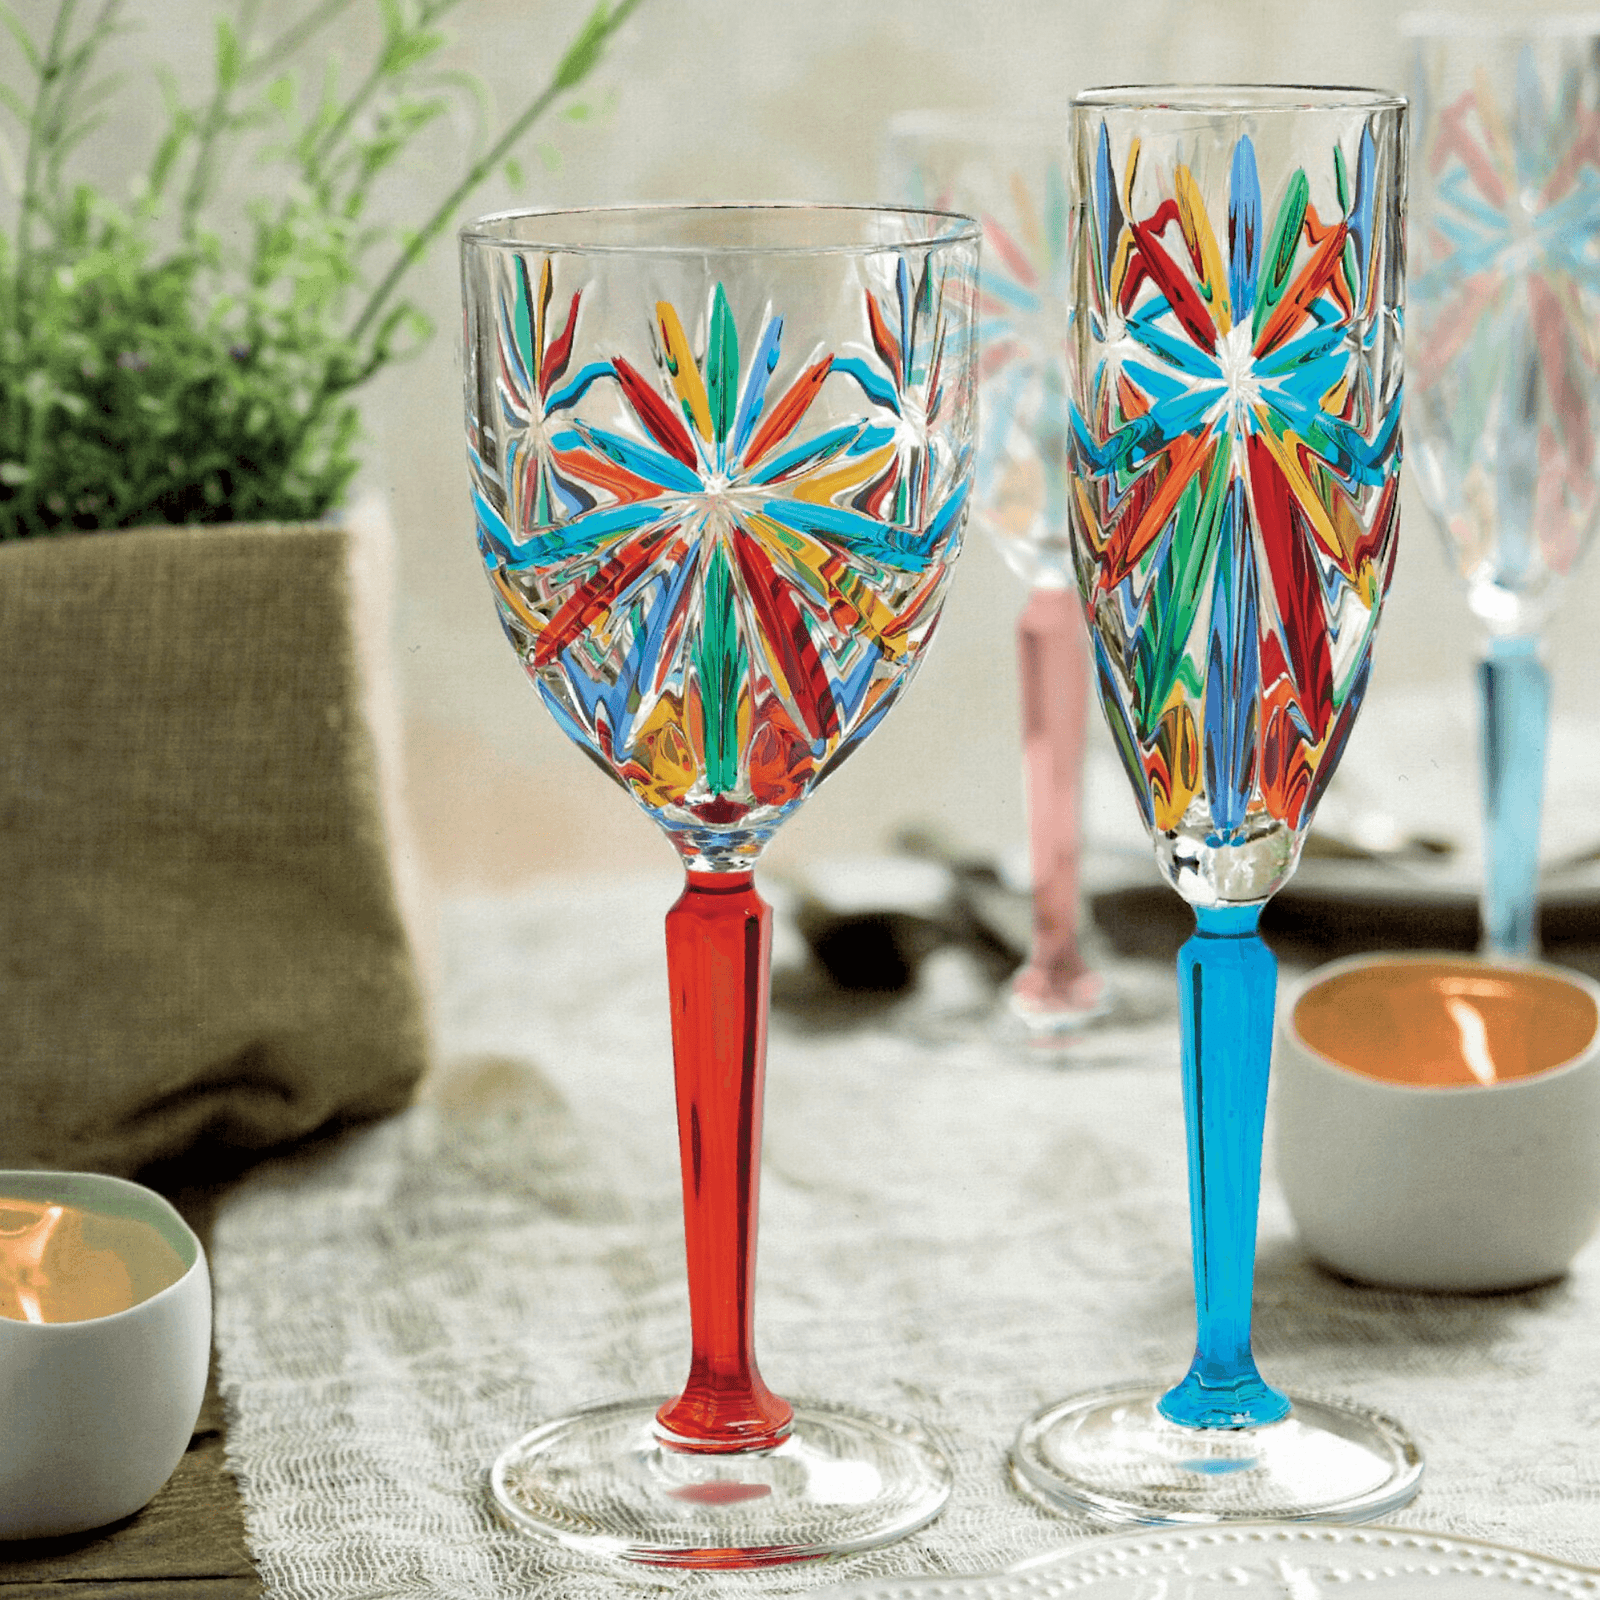 Swatch Tall Drink Glass, Set of 2 Hand-Painted Italian Crystal